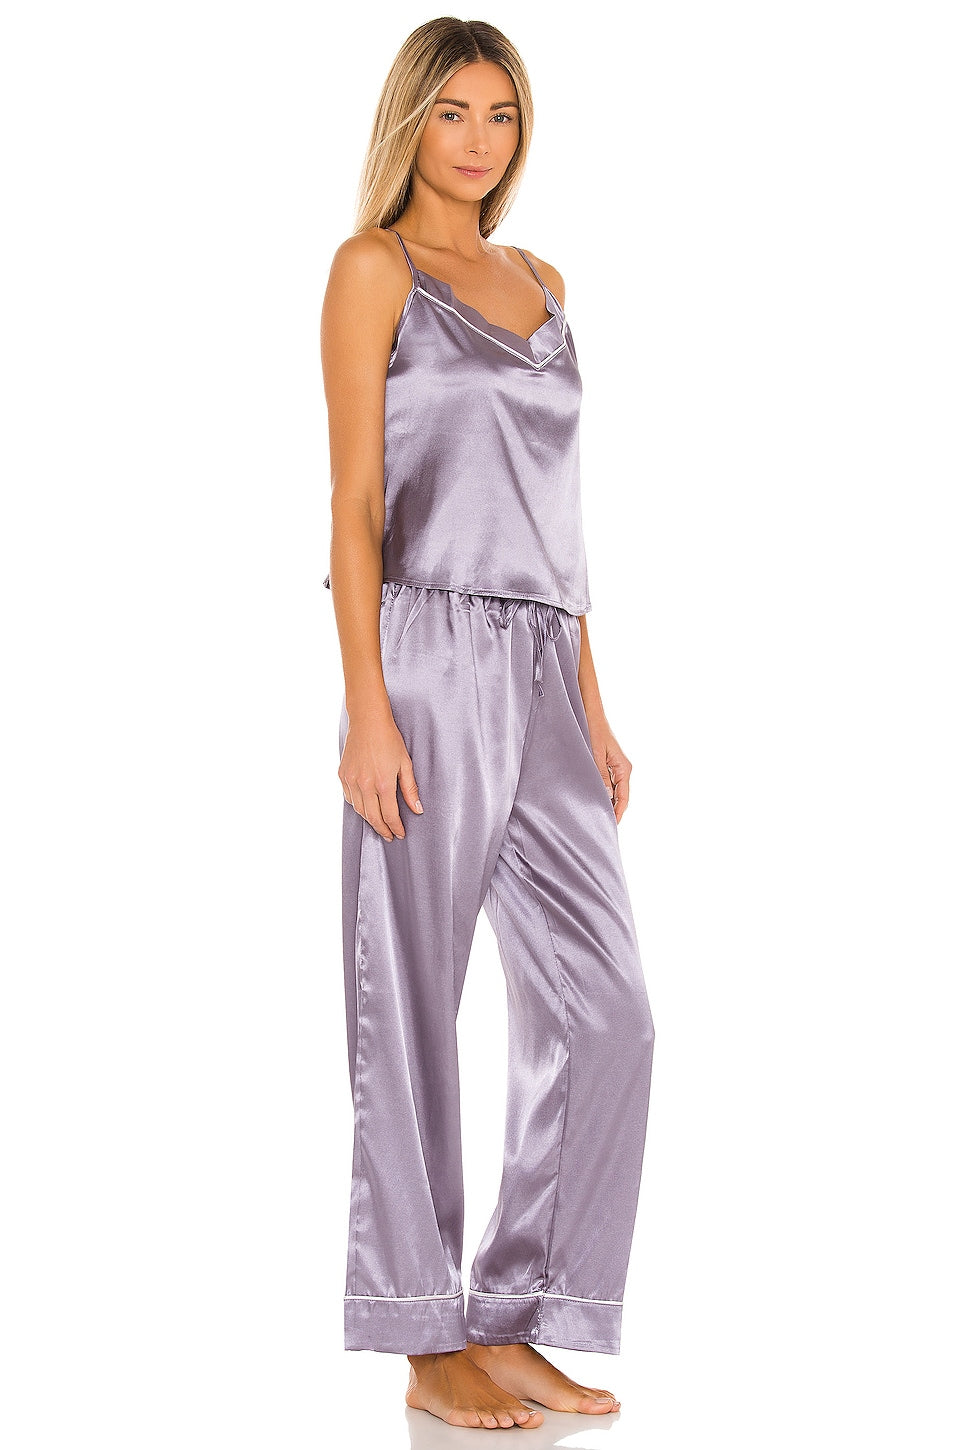 Lovers and Friends Madison PJ Set in Lilac SIZE X-LARGE